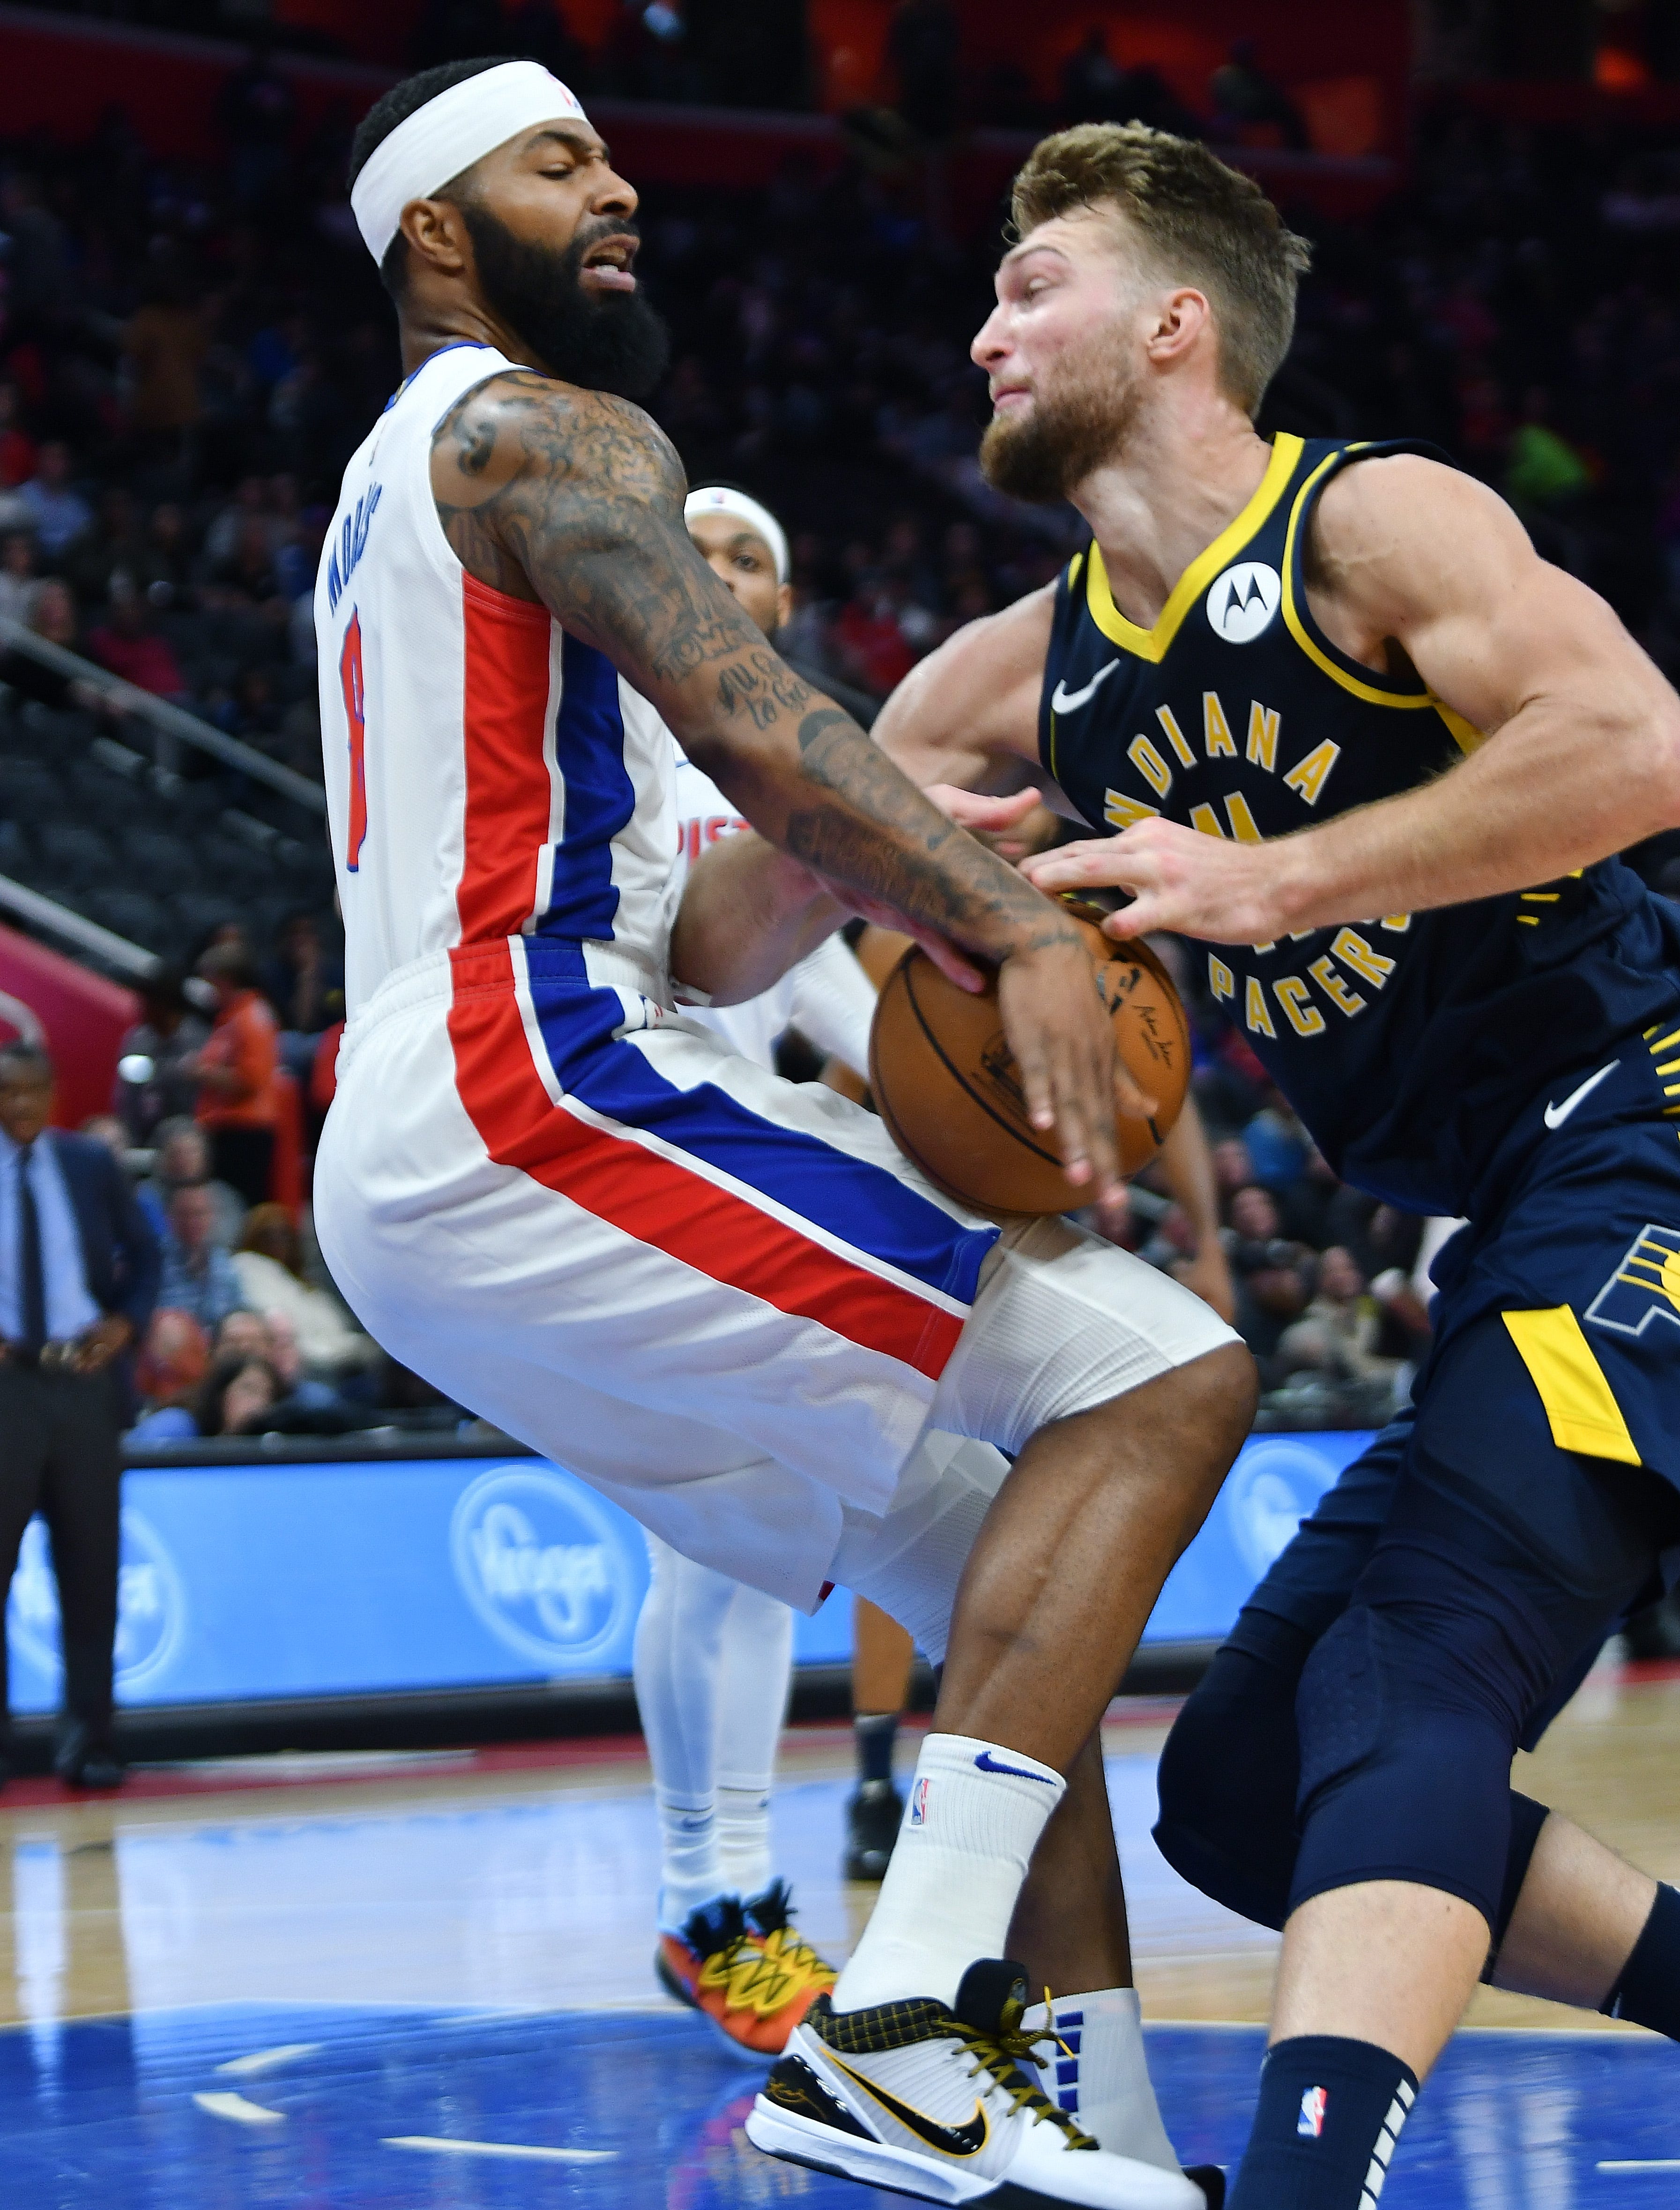 Pistons' Markieff Morris knocks the ball away from Pacers' Domantas Sabonis in the fourth quarter.